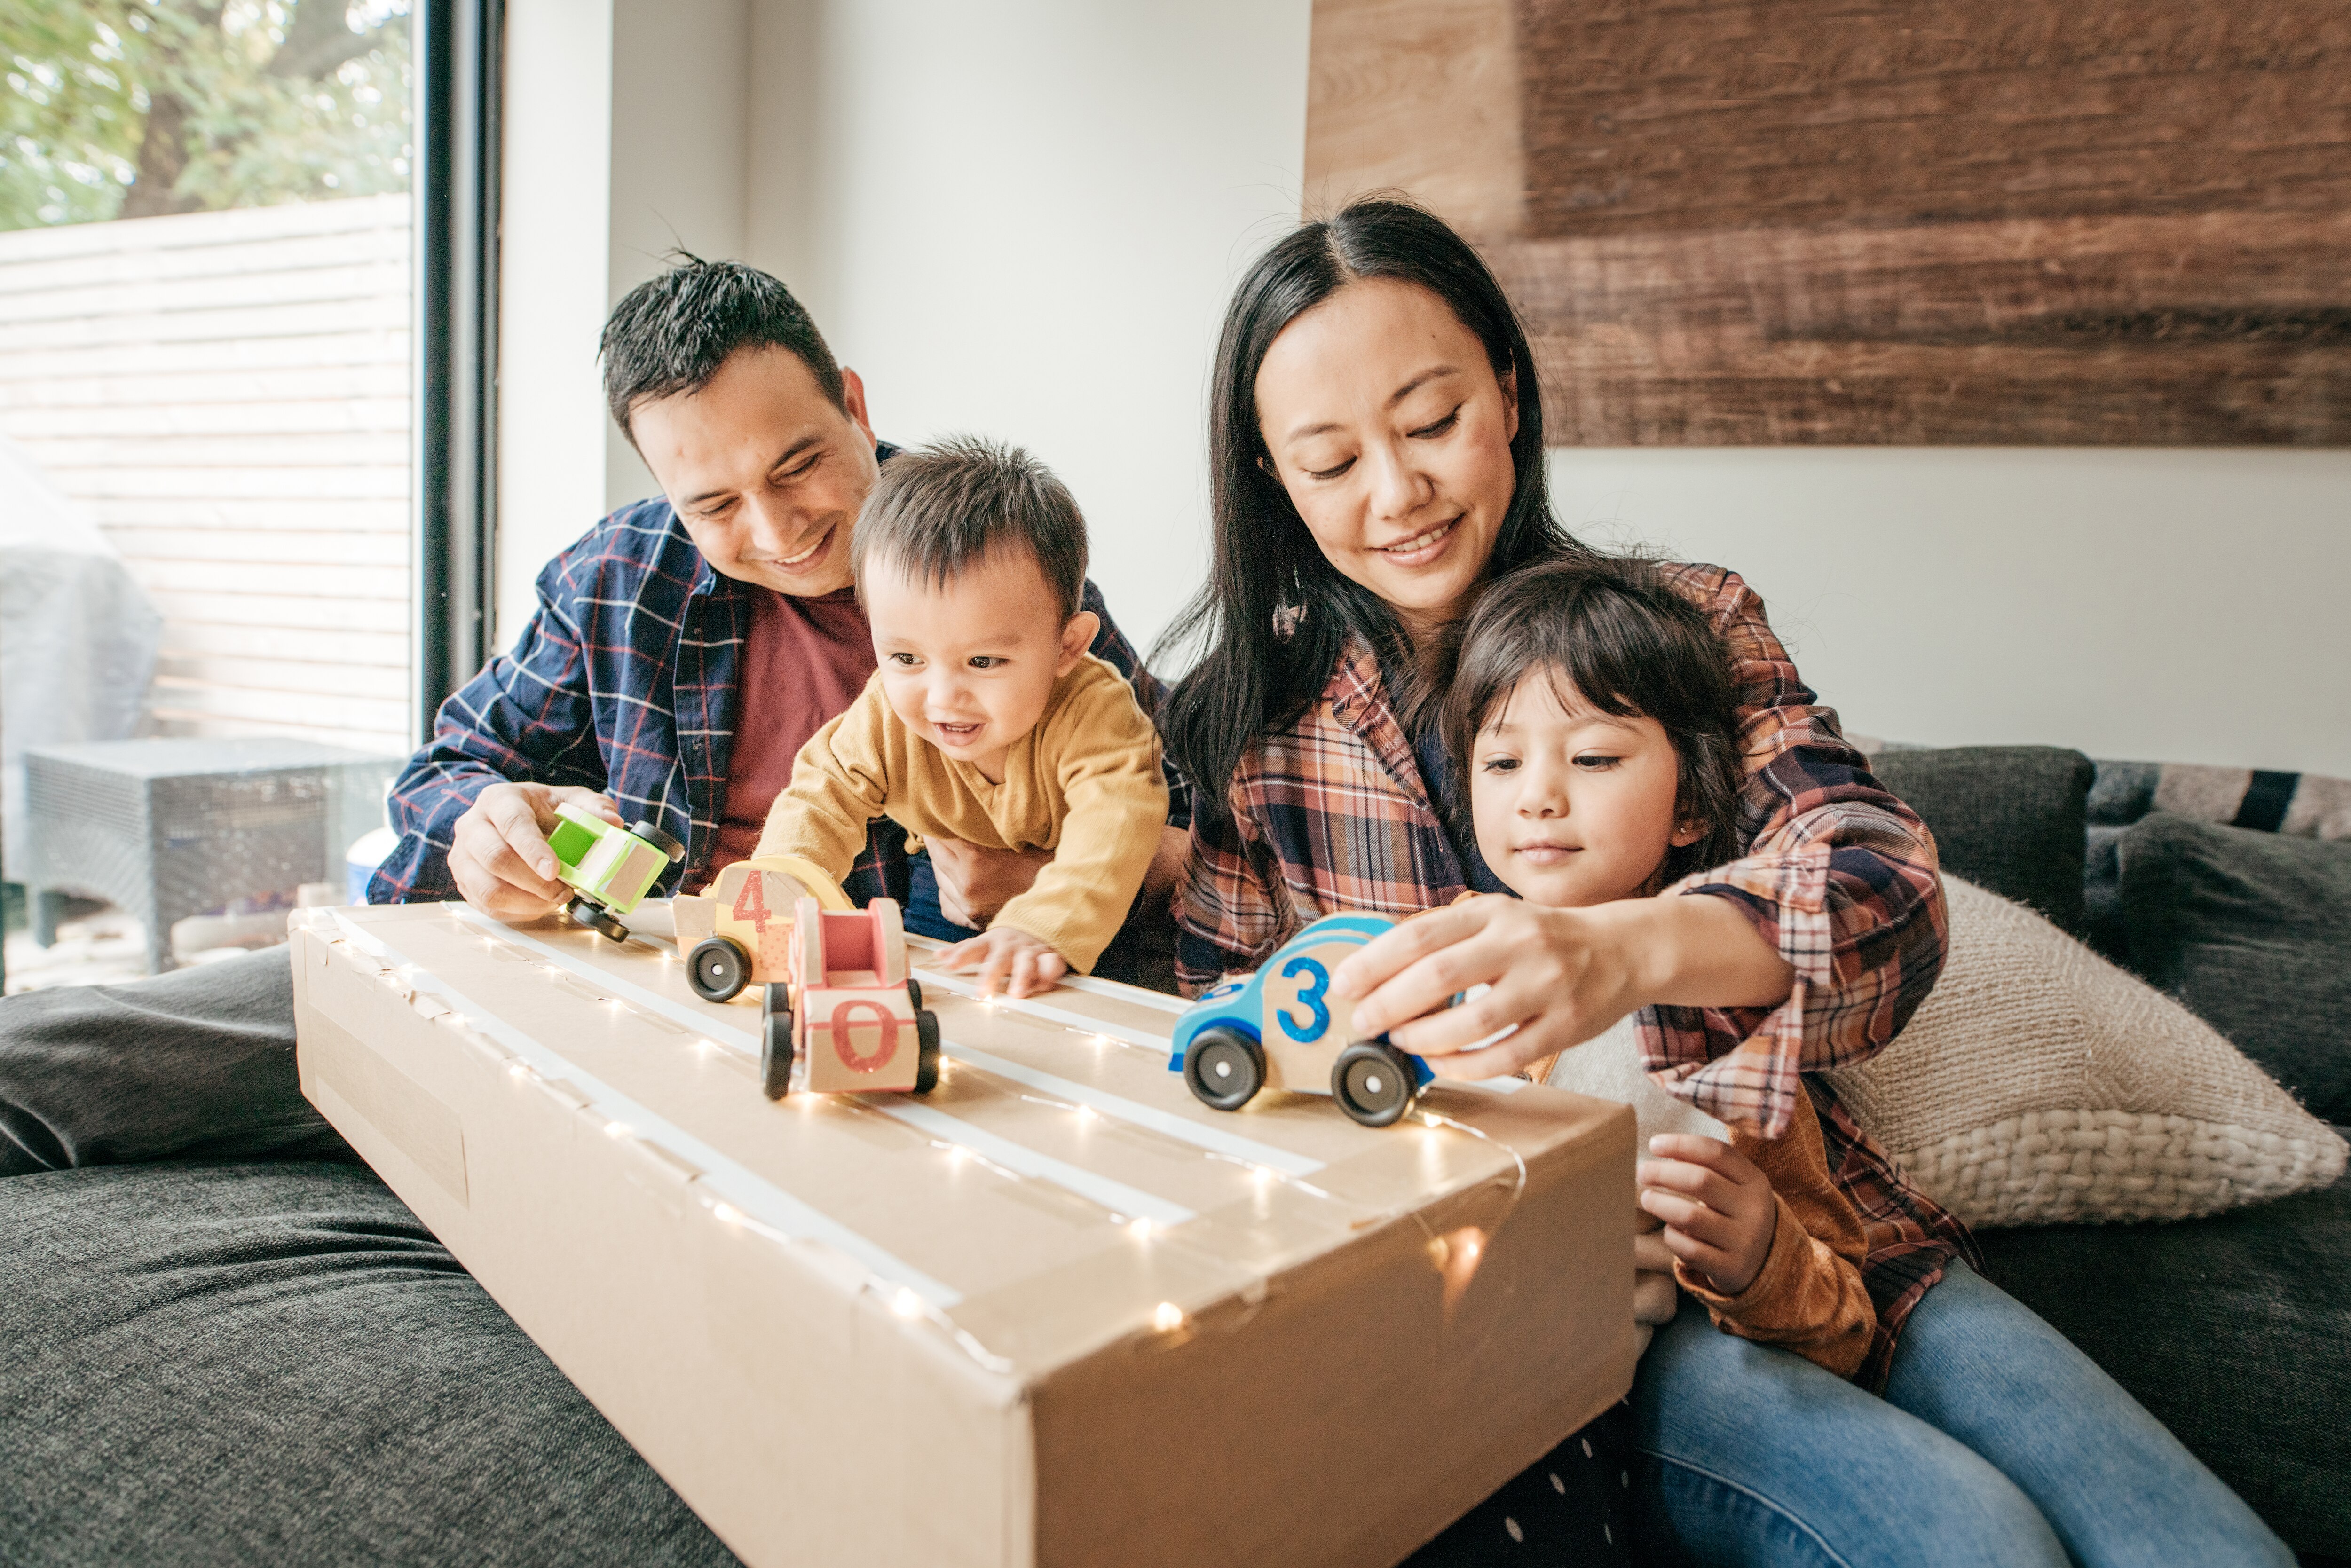 Man, woman, and two children playing with toy cars